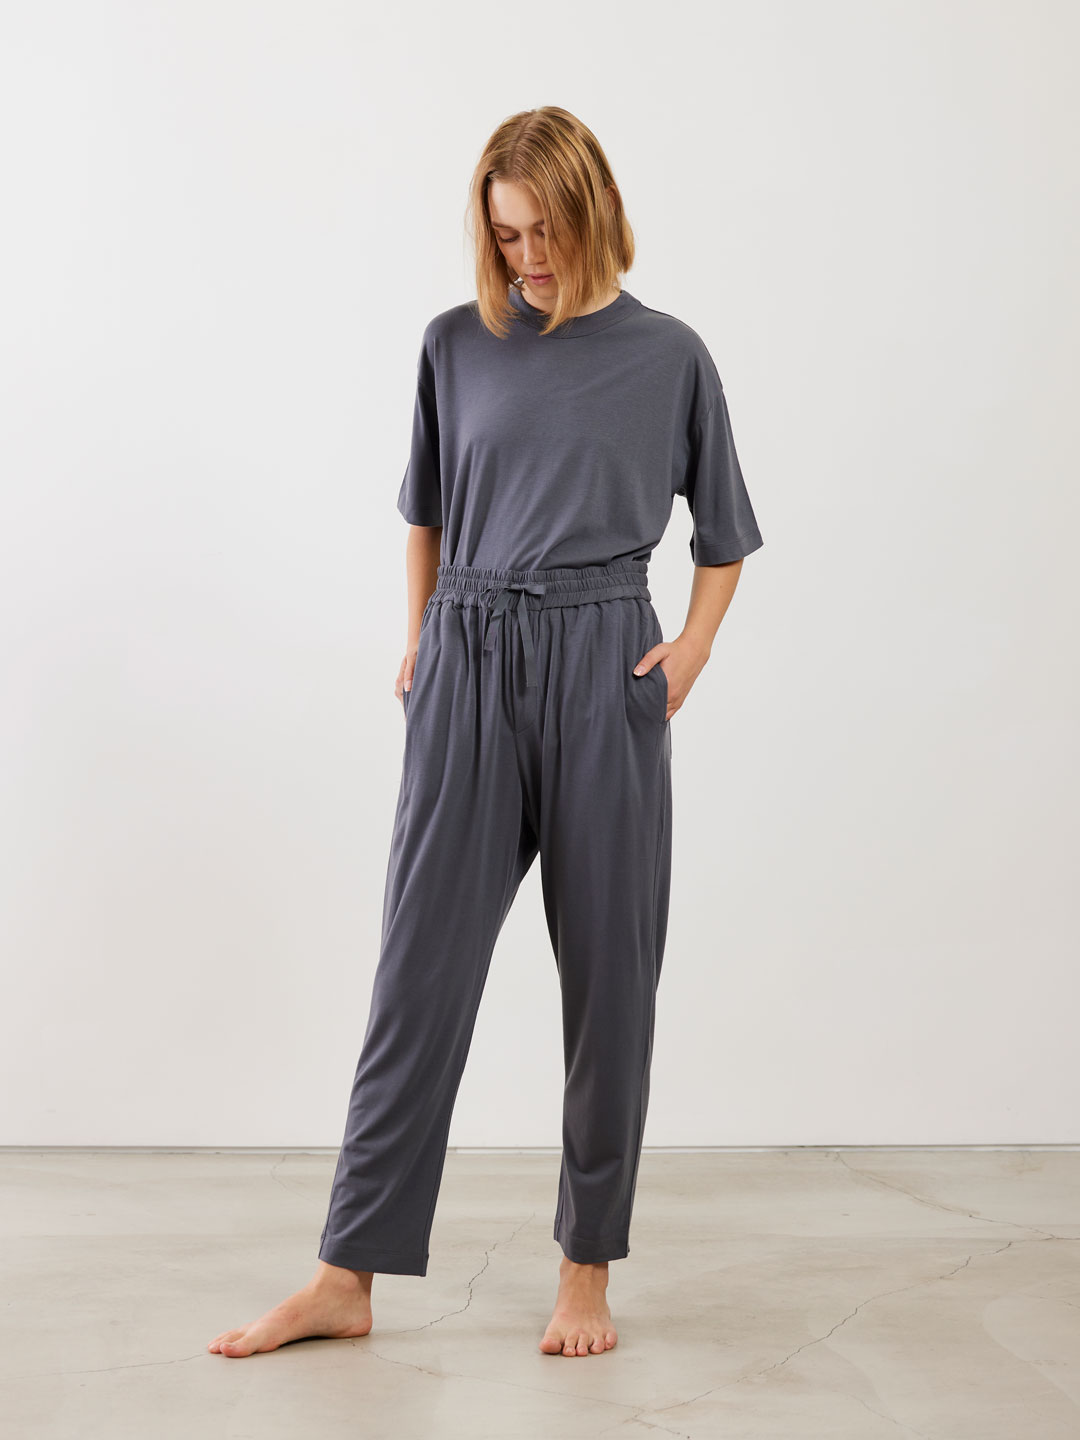 Cotton Spinning Wool Easy Pants - Grey